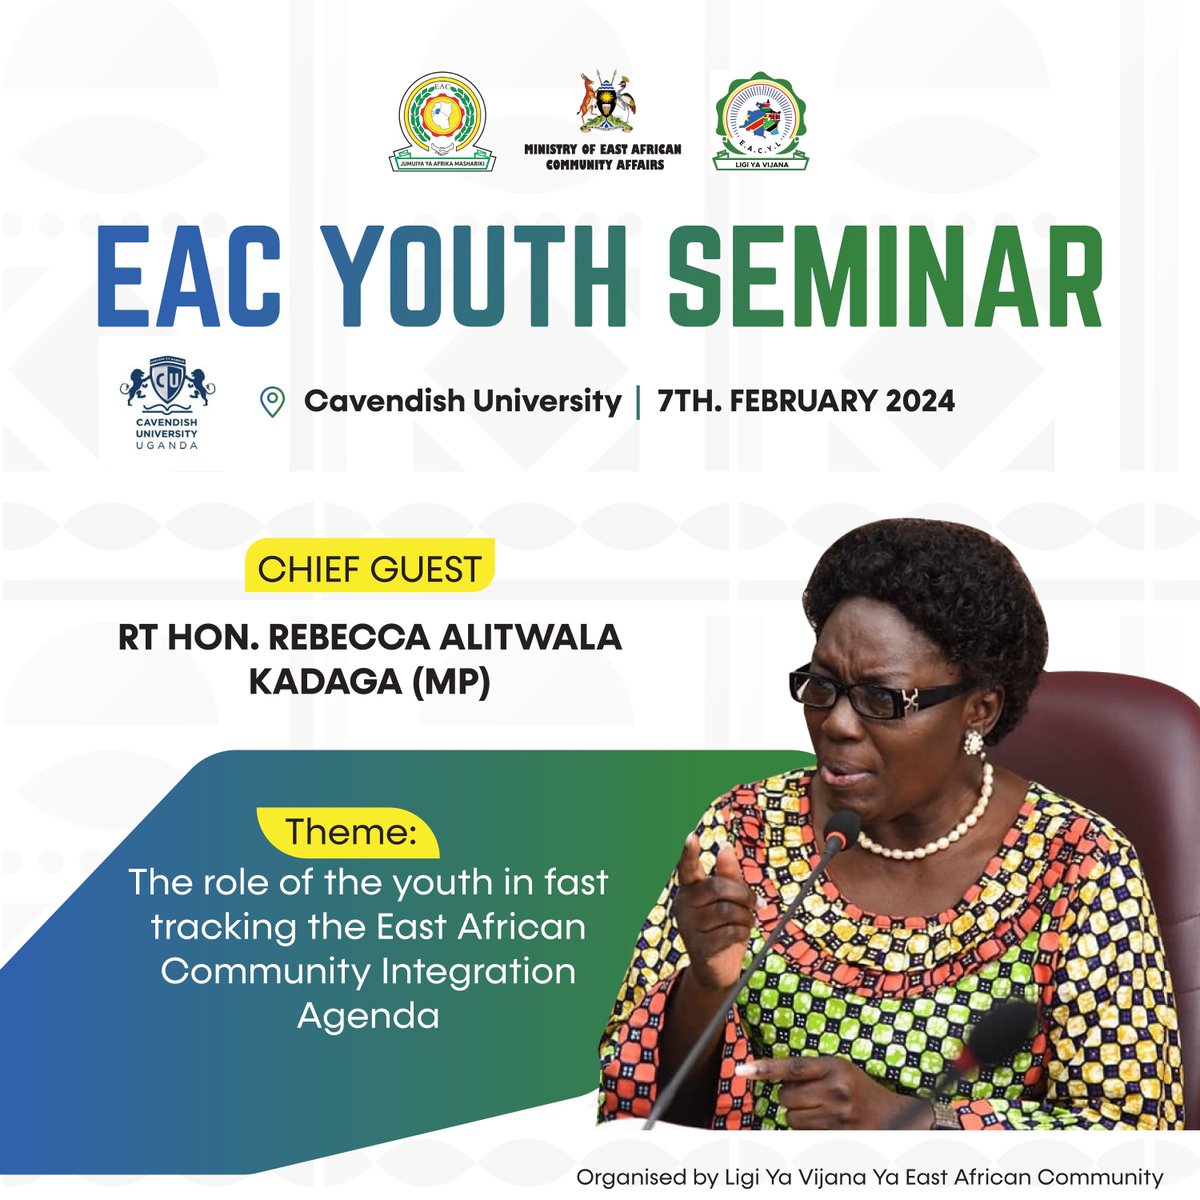 The 1st Deputy Prime Minister and Minister of East Africa Affairs-Uganda, Rt Hon. Rebecca Alitwala Kadaga (MP) will officiate the EAC Youth Seminar (Uganda) happening on Wednesday 7th February 2024 at Cavendish University. See you all there! 🥳